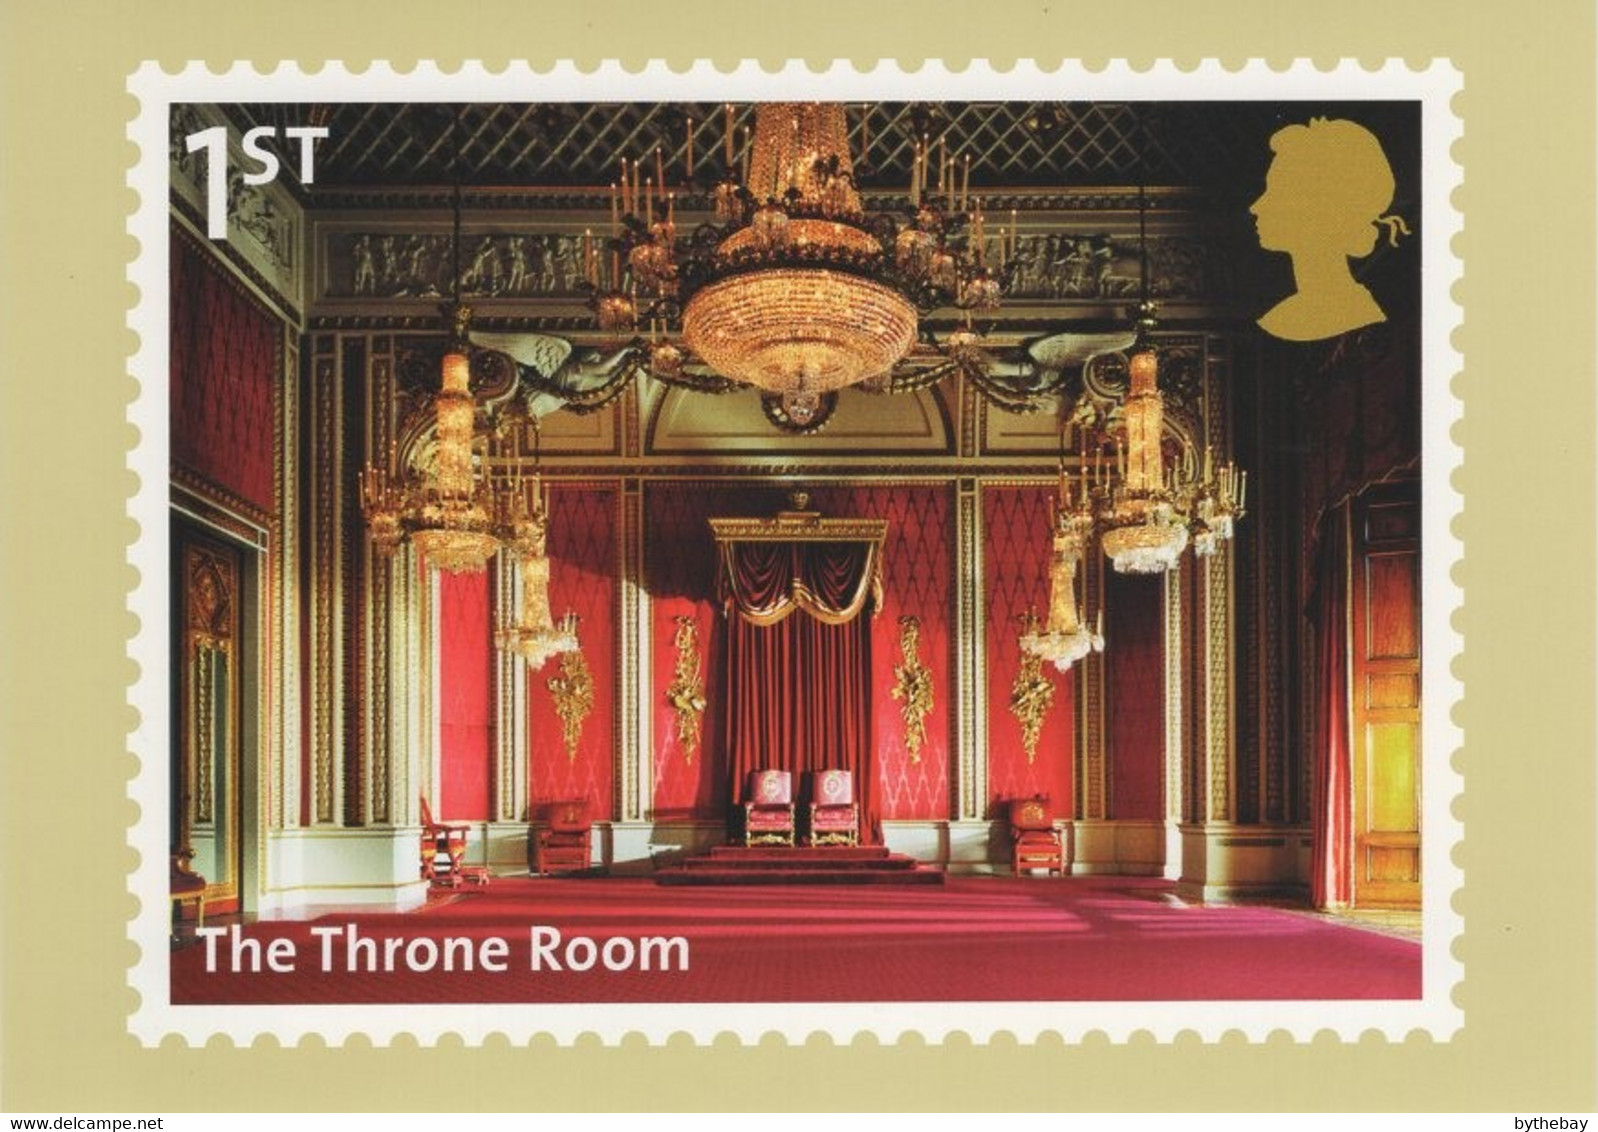 Great Britain 2014 PHQ Card Sc 3285a 1st The Throne Room Buckingham Palace - PHQ Cards